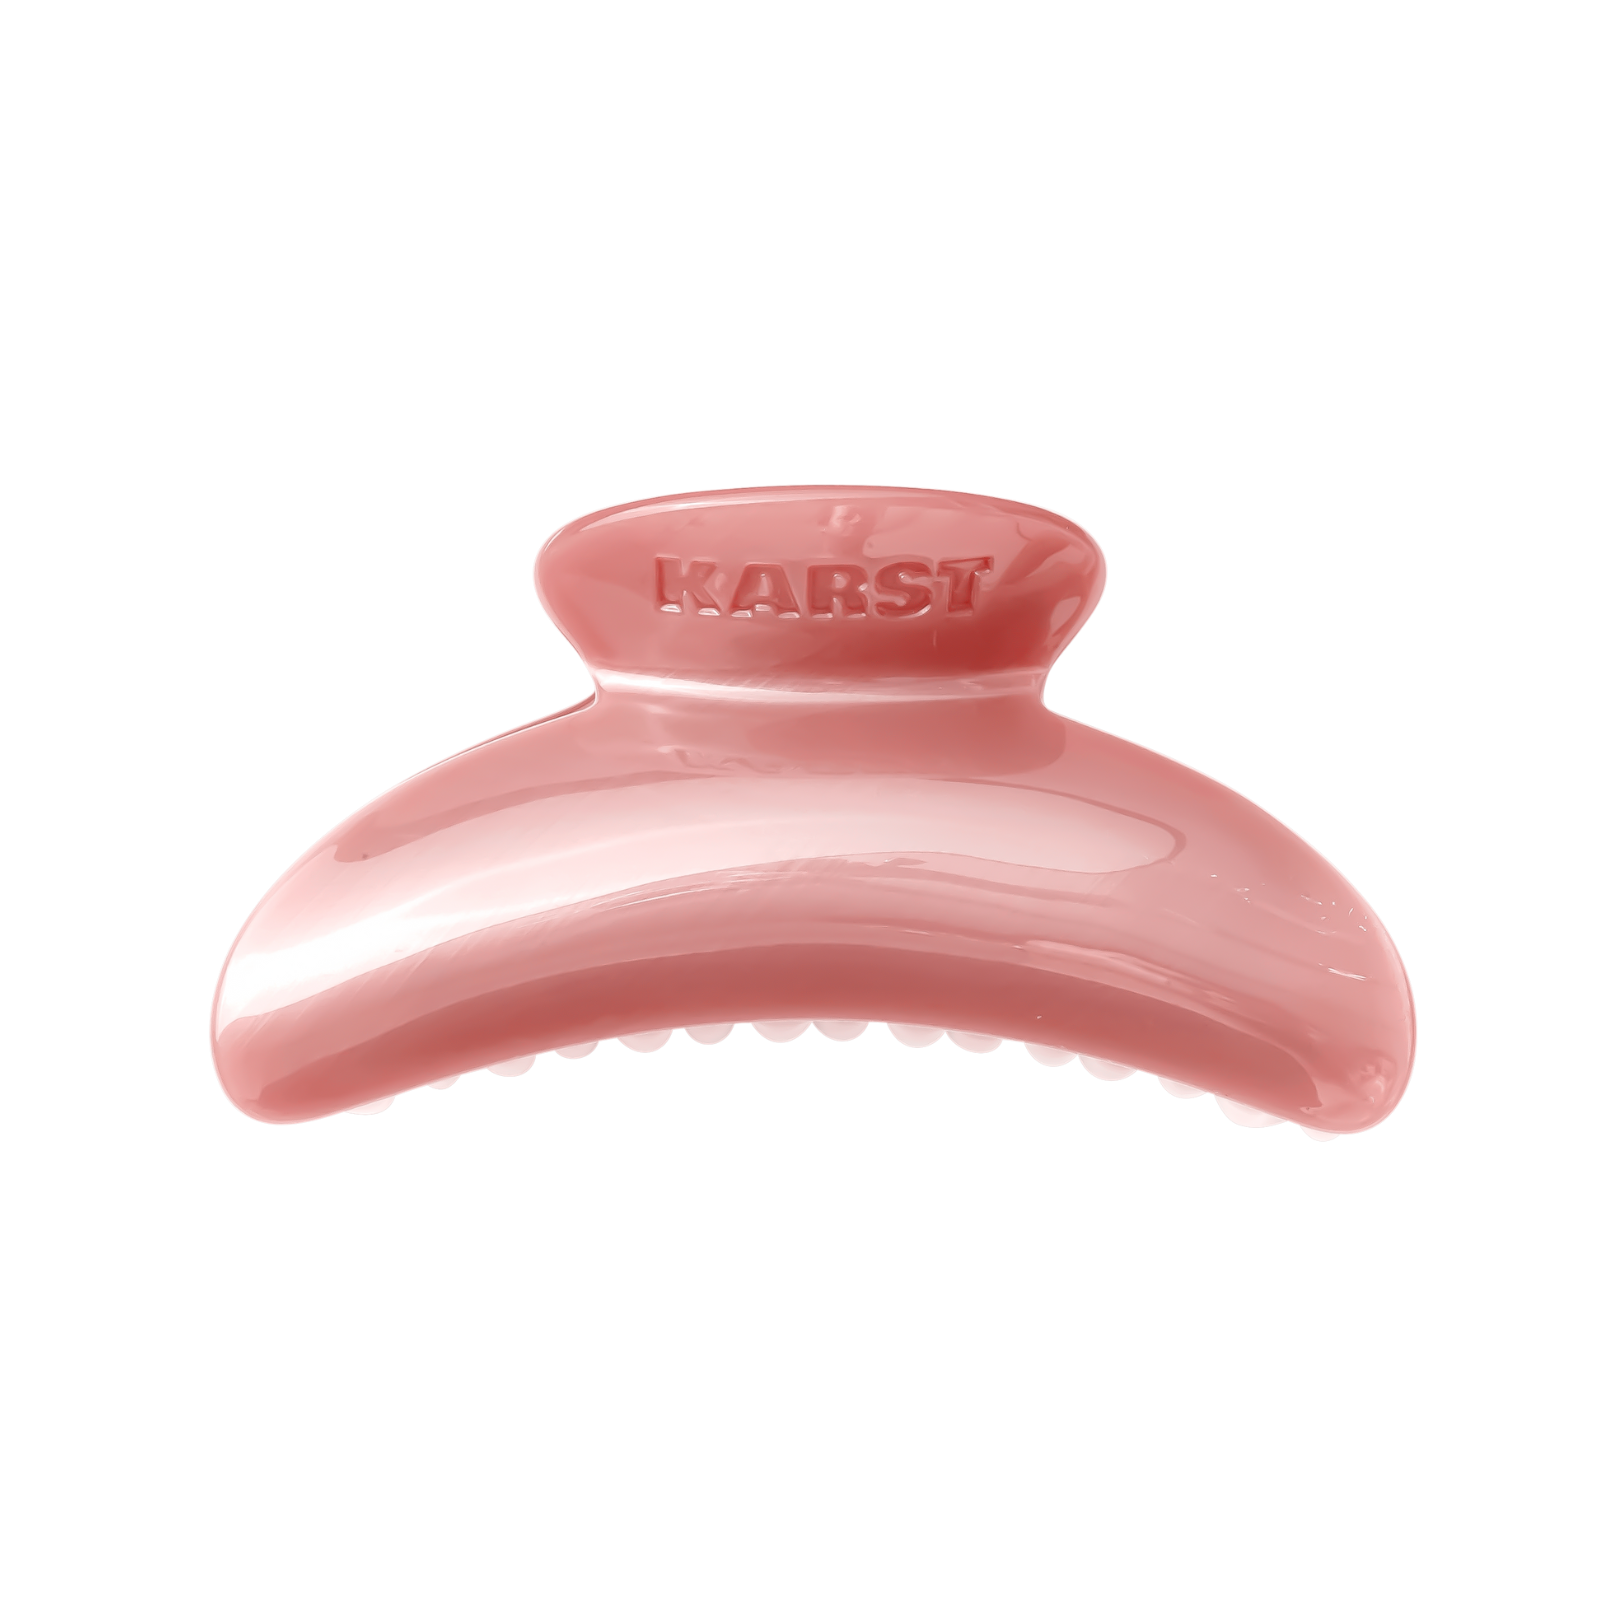 The SuperClip in Frosted Lipstick